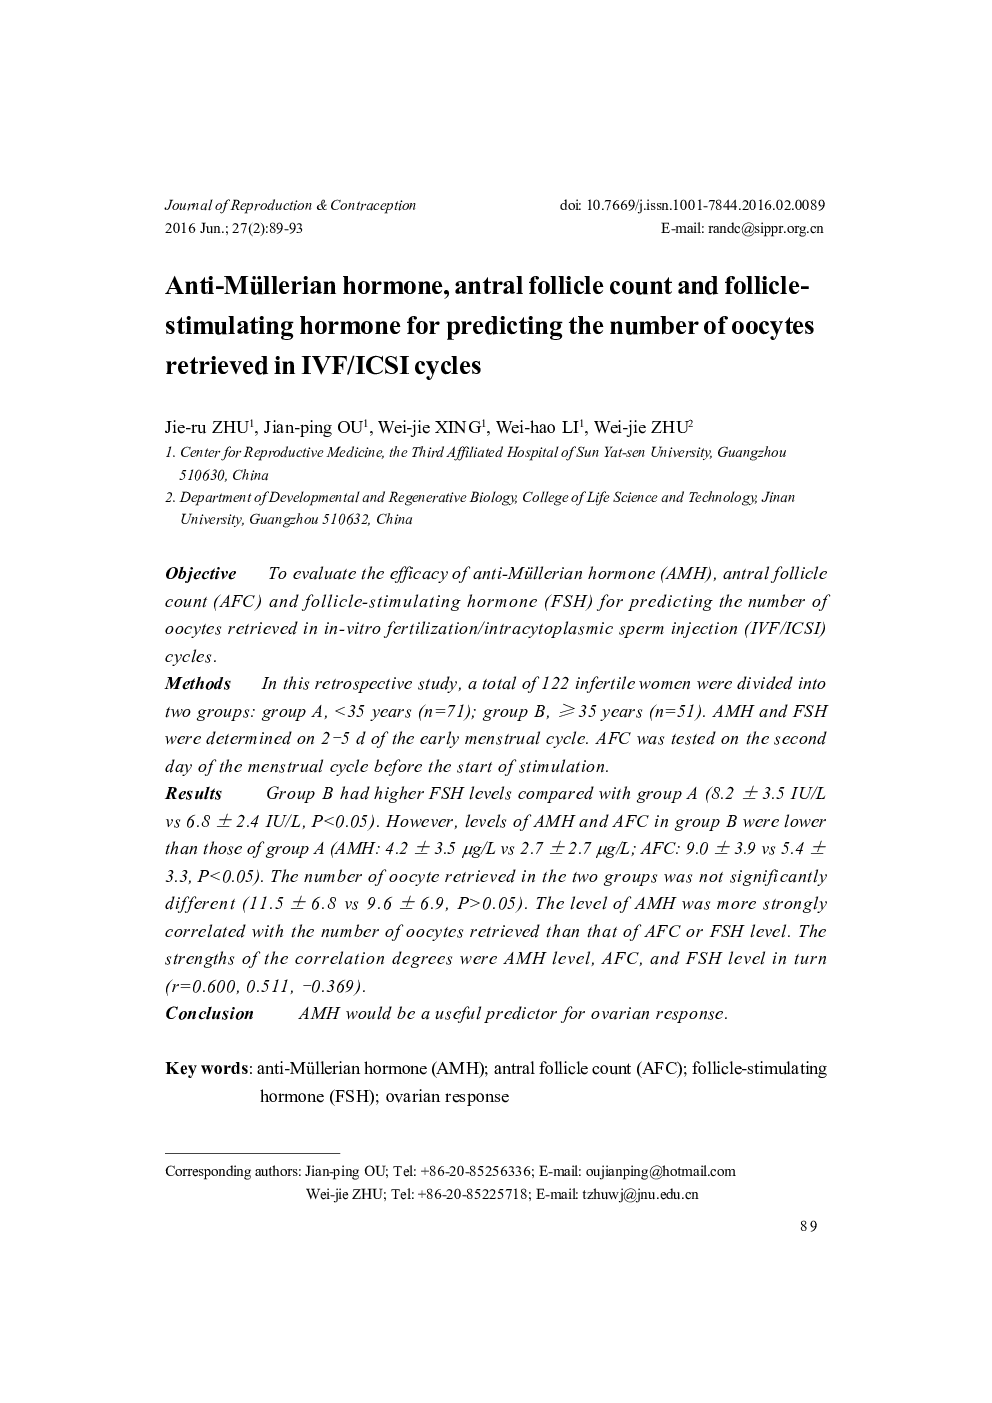 Anti-Müllerian hormone, antral follicle count and follicle-stimulating hormone for predicting the number of oocytes retrieved in IVF/ICSI cycles